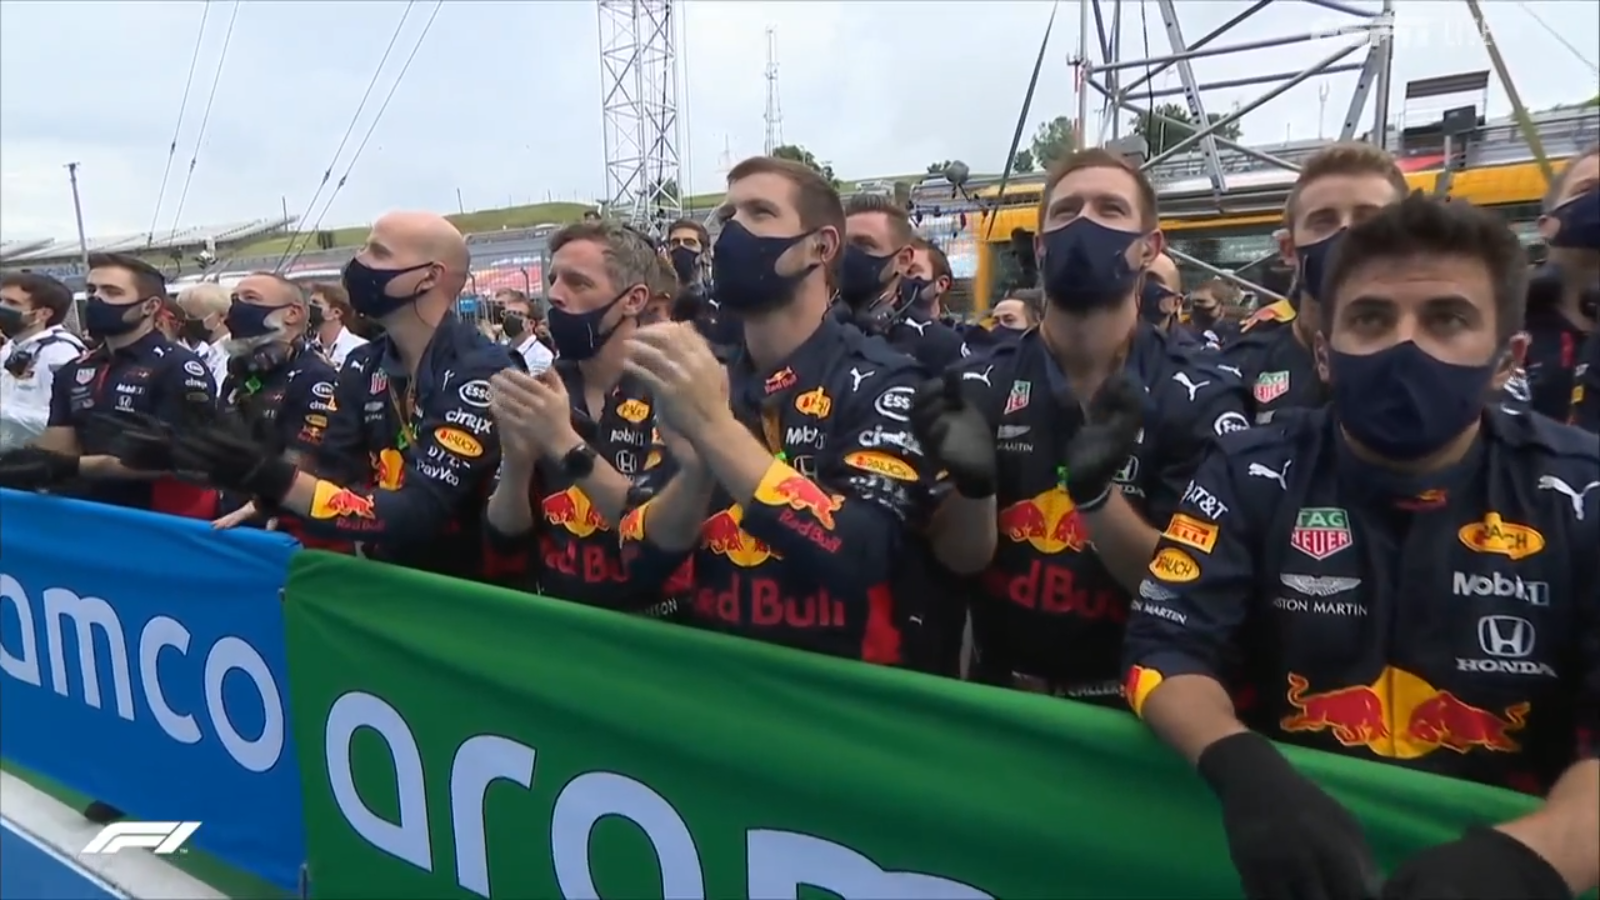 The Red Bull Racing Honda team celebrates their 2nd place finish.